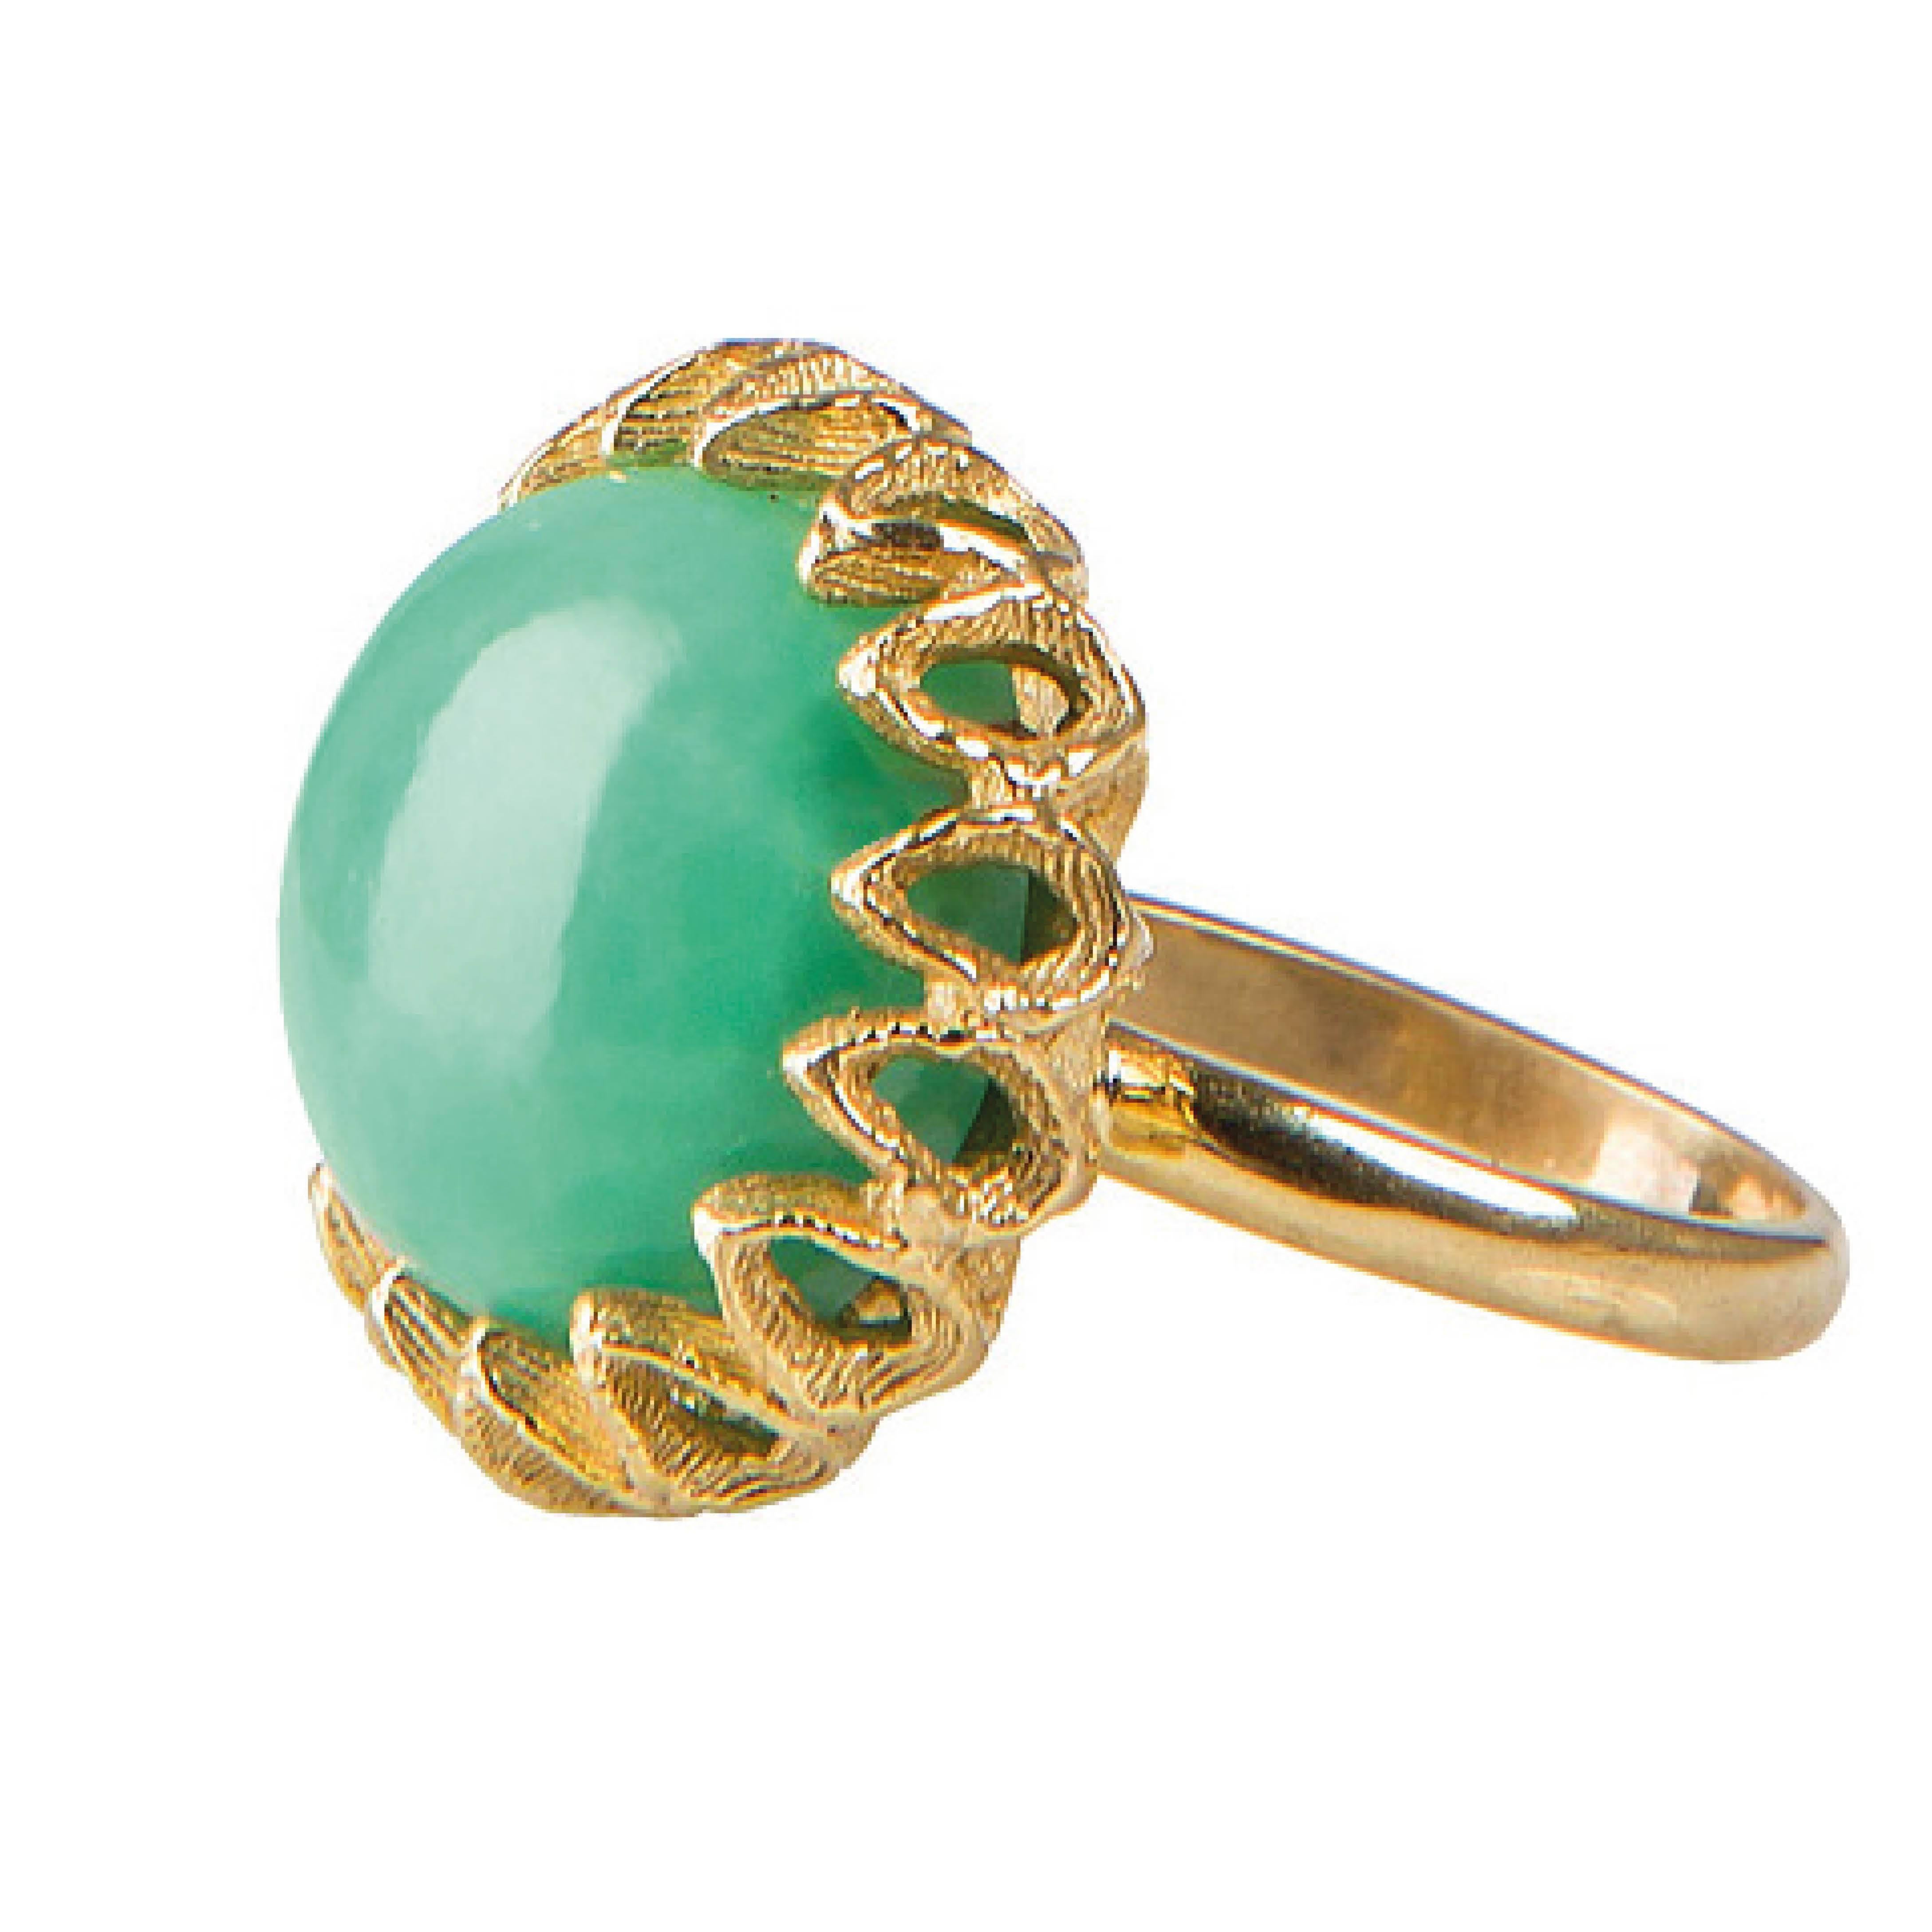 Cocktail ring set with chrysoprase gemstone in 18kt gold plate band. 

US size 6 3/4 (UK N 1/2)

Made in London. Resizing available. 

